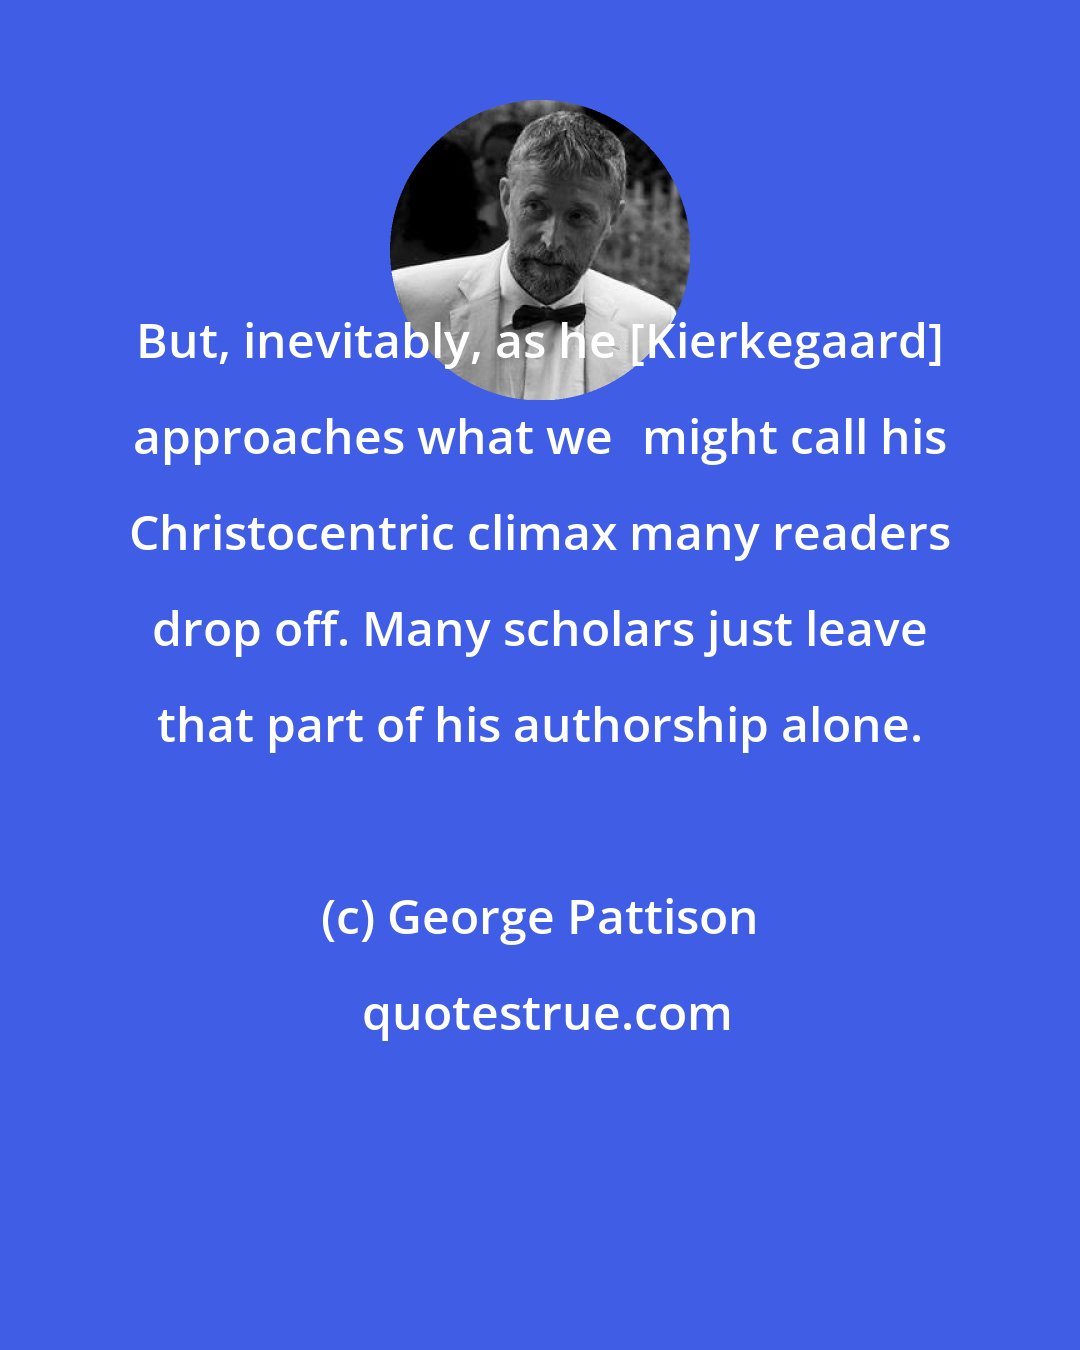 George Pattison: But, inevitably, as he [Kierkegaard] approaches what we	might call his Christocentric climax many readers drop off. Many scholars just leave that part of his authorship alone.